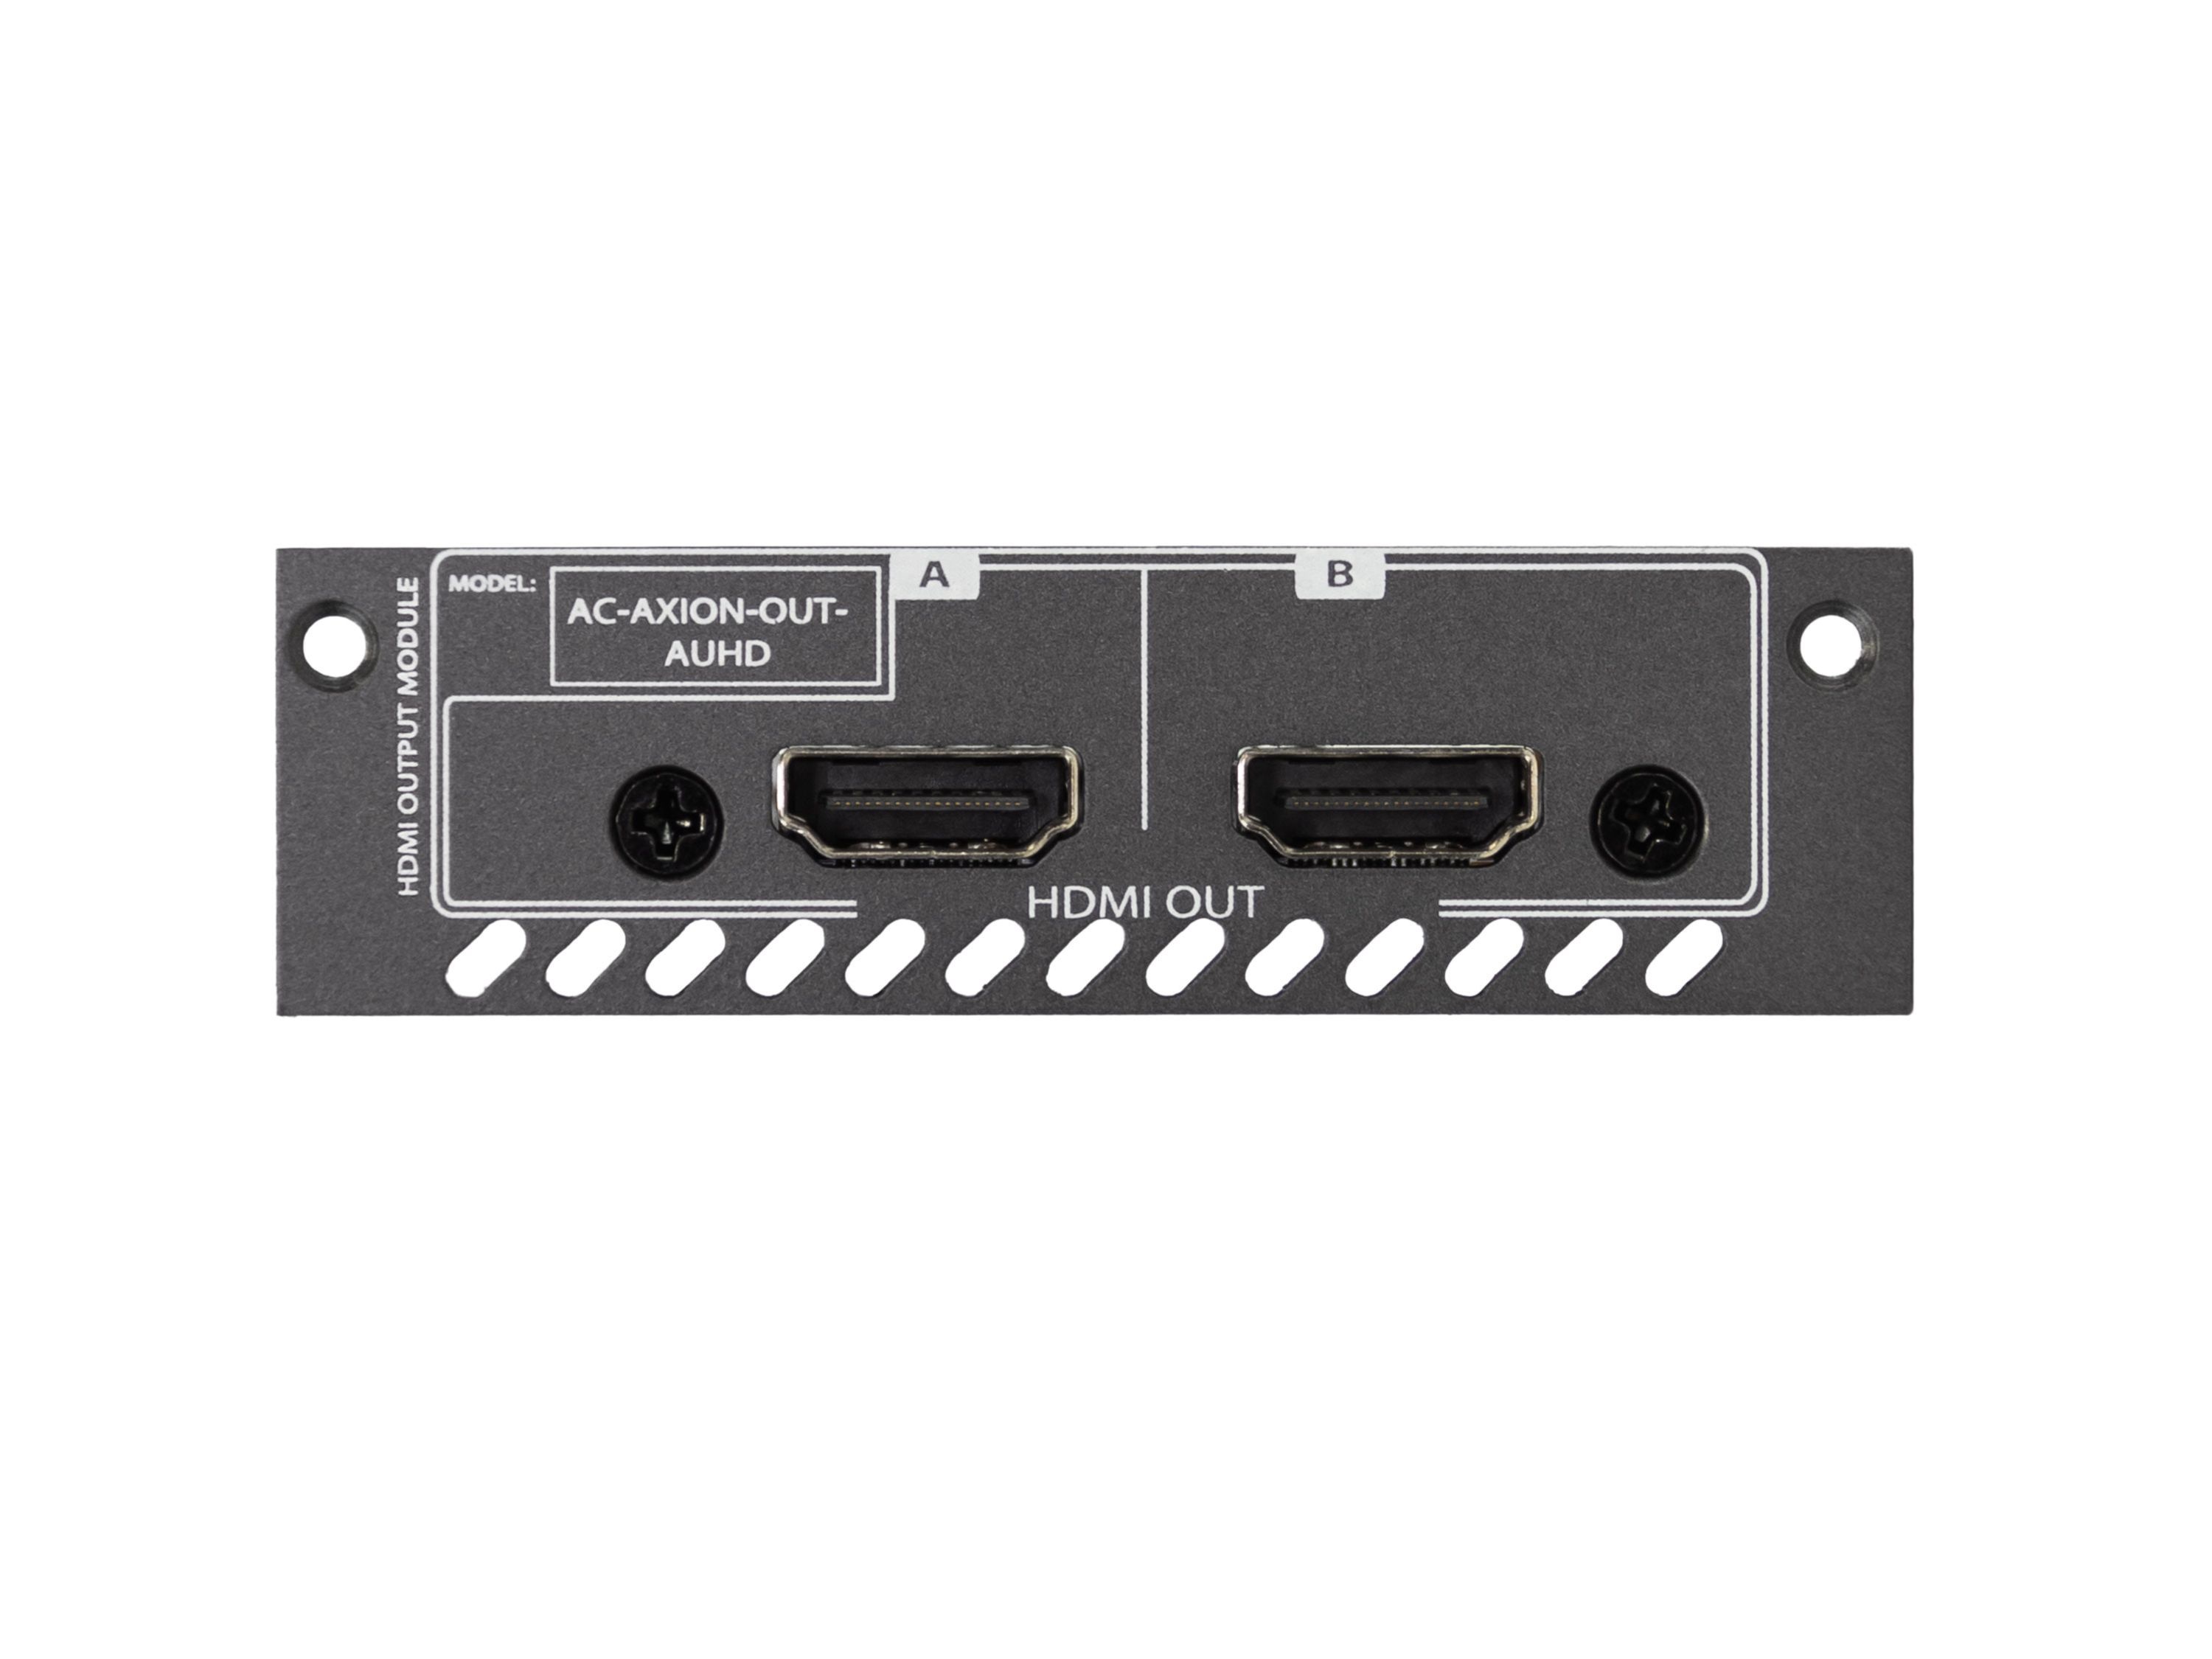 AC-AXION-OUT-AUHD Dual 18Gbps HDMI Output Ports Card by AVPro Edge